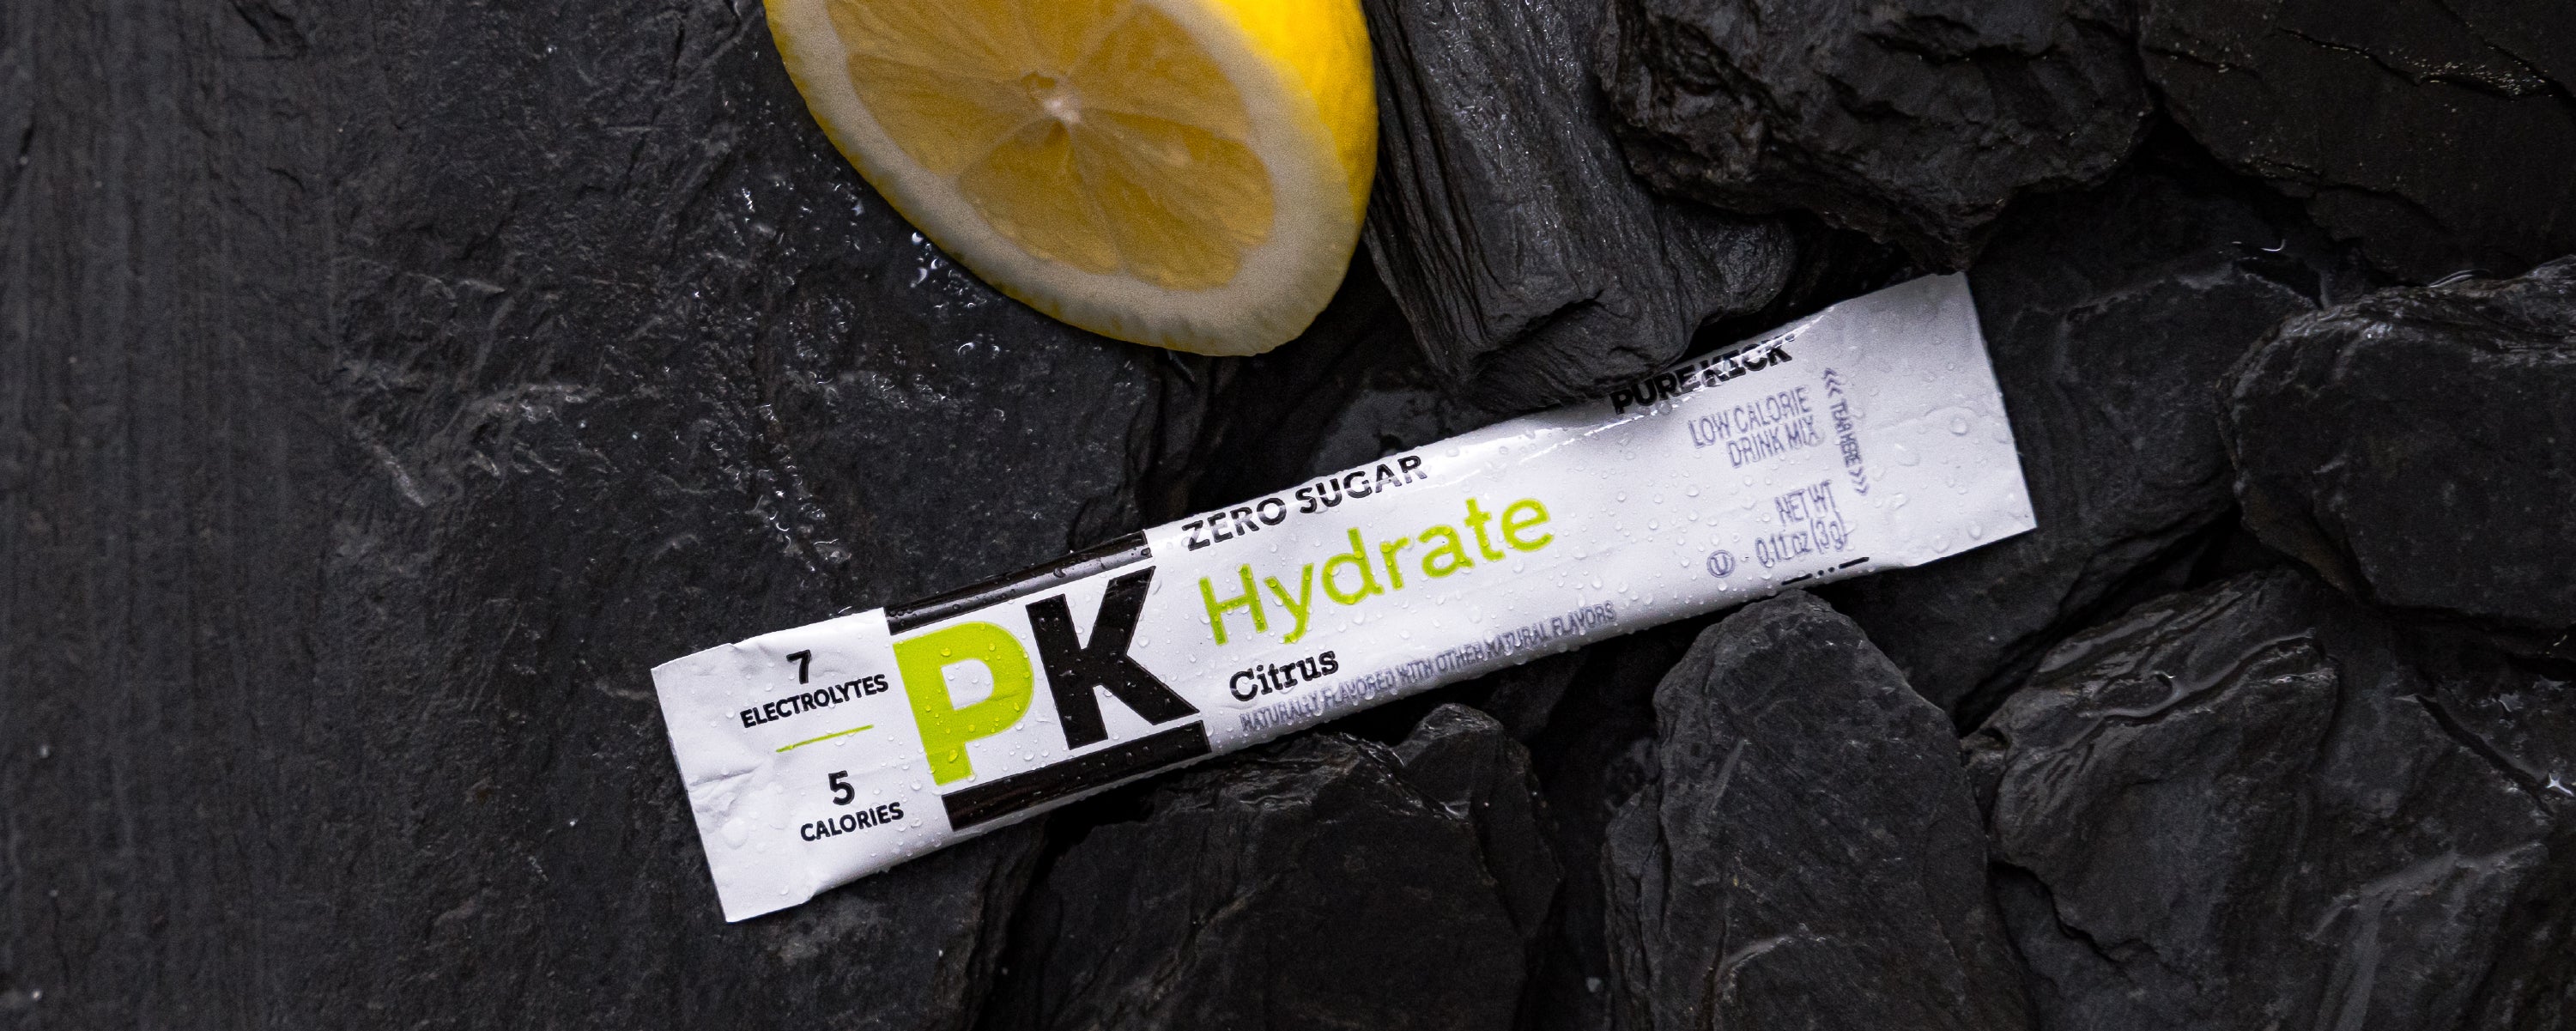 Pure Kick hydrate Citrus Drink Packets